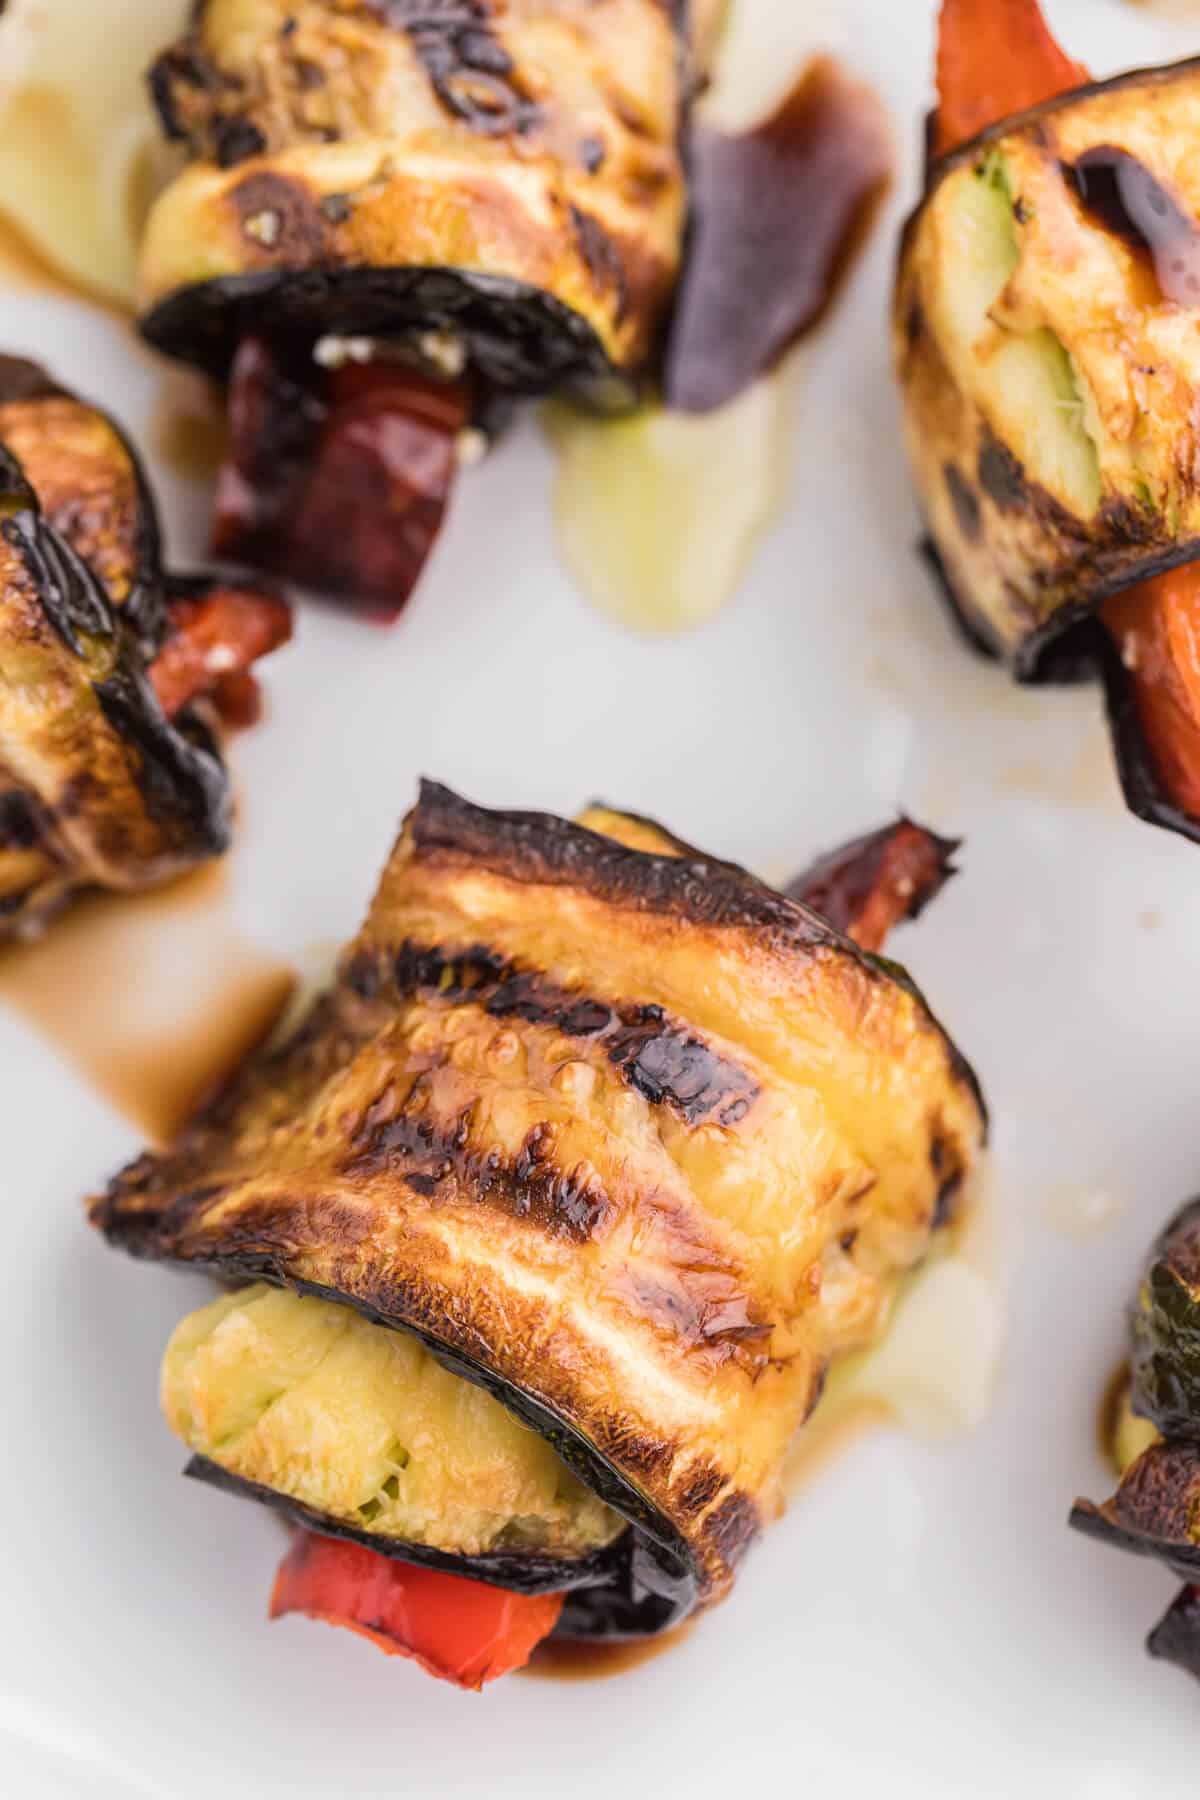 Grilled Zucchini Roll-Ups - A simple, but savory summer appetizer. This easy recipe wraps grilled zucchini strips around herbed goat cheese and grilled red peppers with a finish of extra olive oil and balsamic vinegar. Mmm!